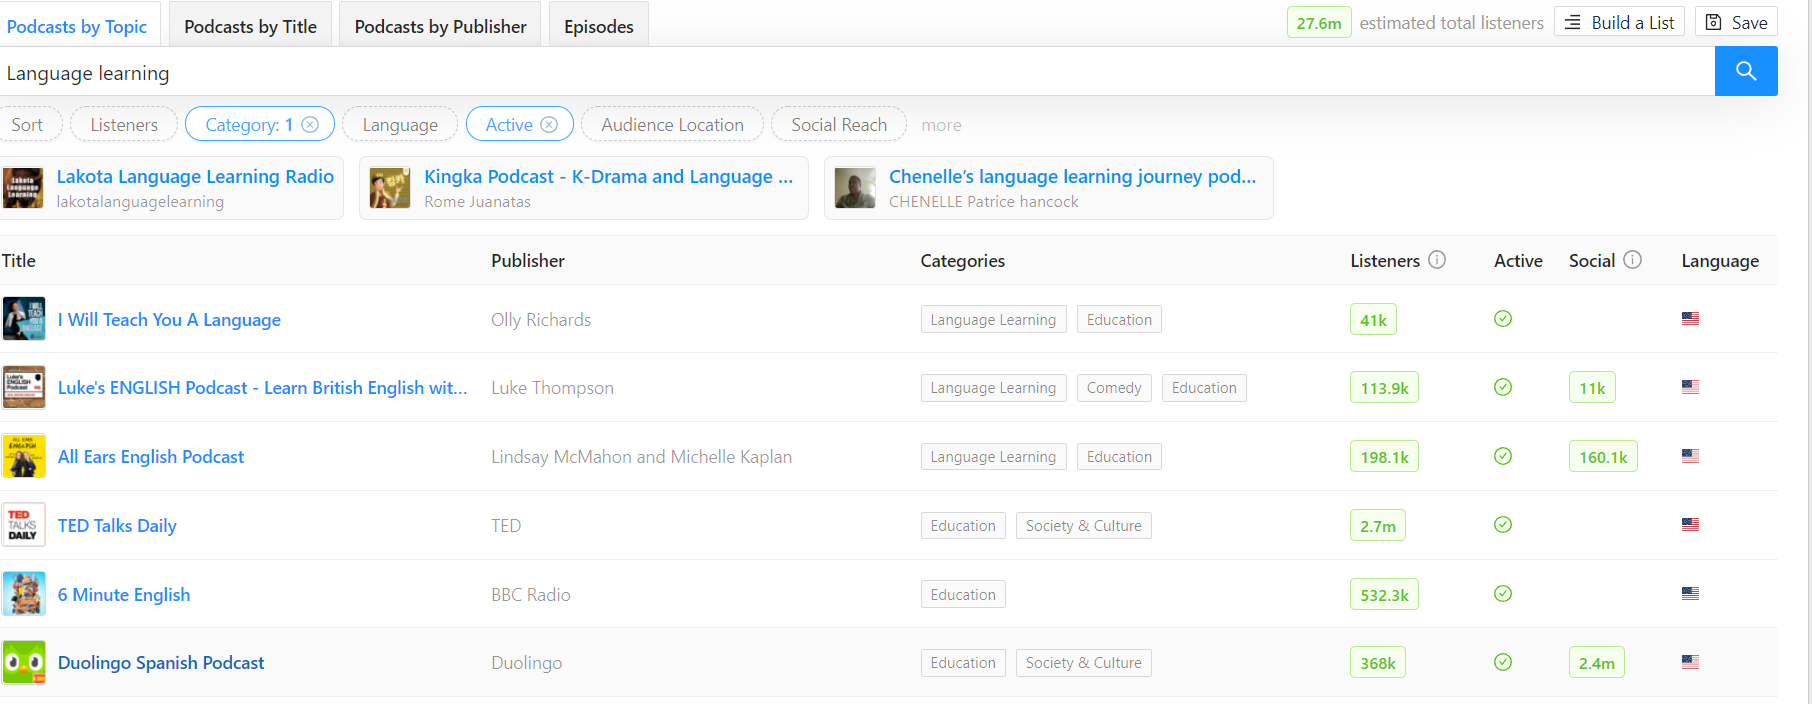 Podcast results for 'language learning' search in Rephonic